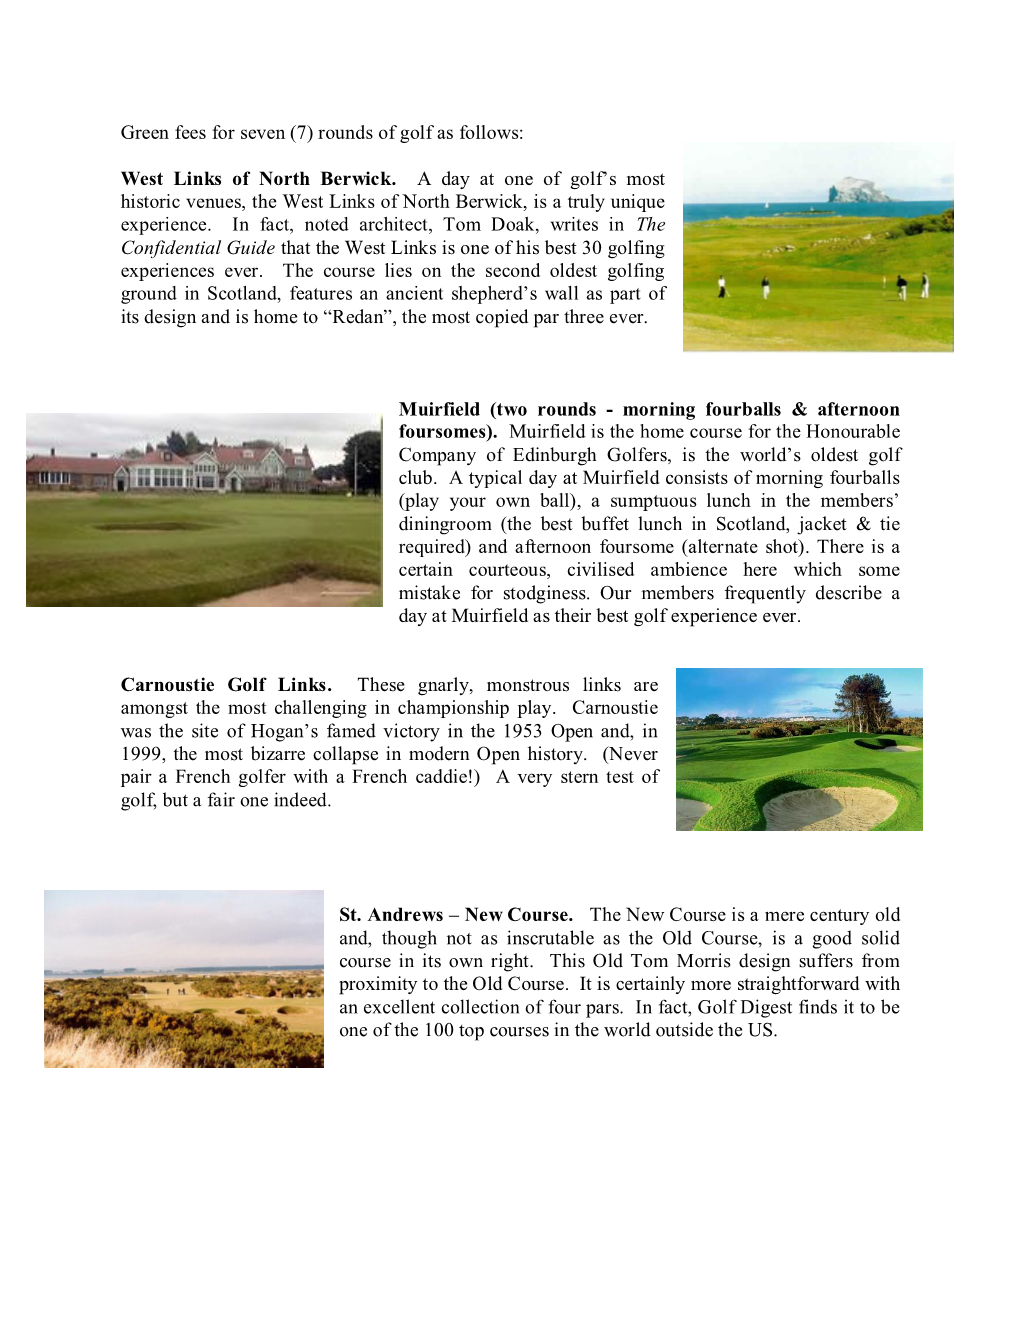 West Links of North Berwick. a Day at One of Golf's Most Historic Venues